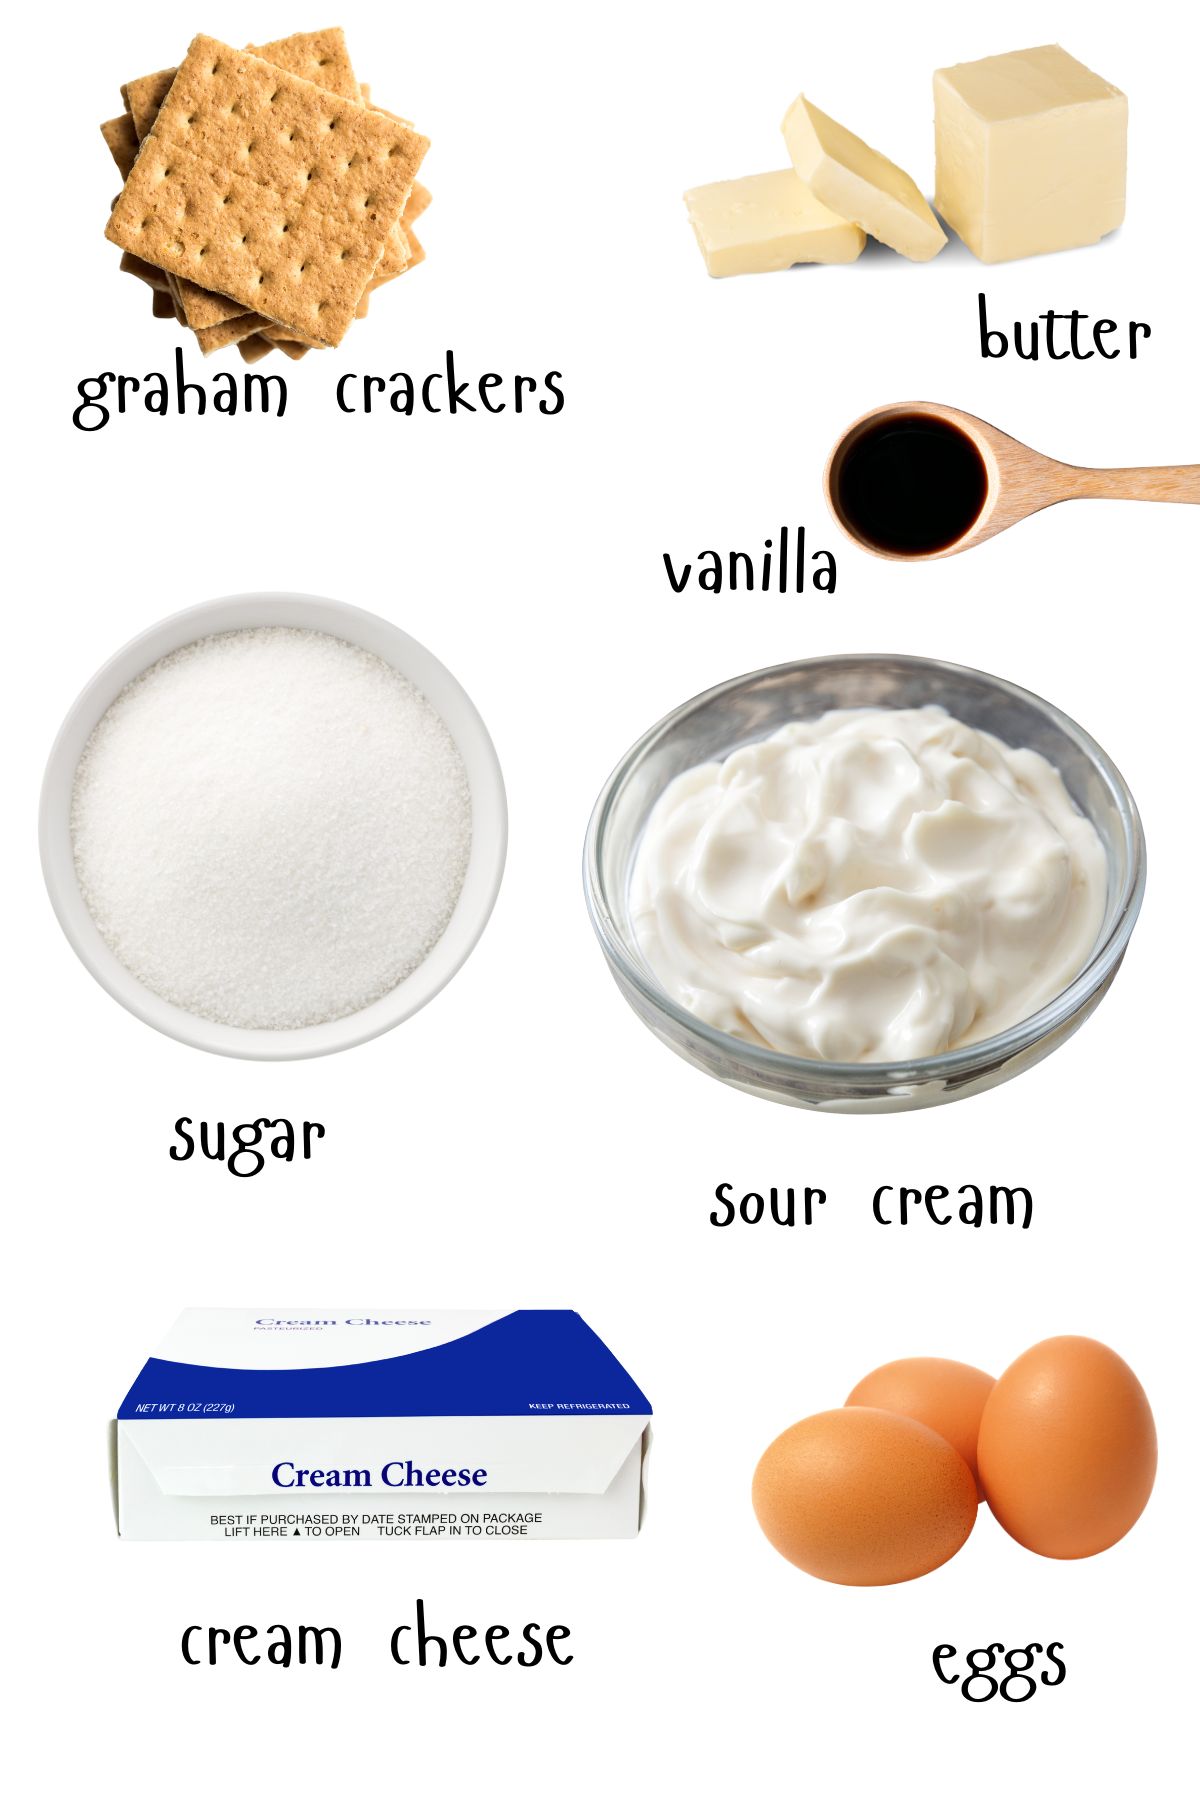 Labeled ingredients for cheesecake.